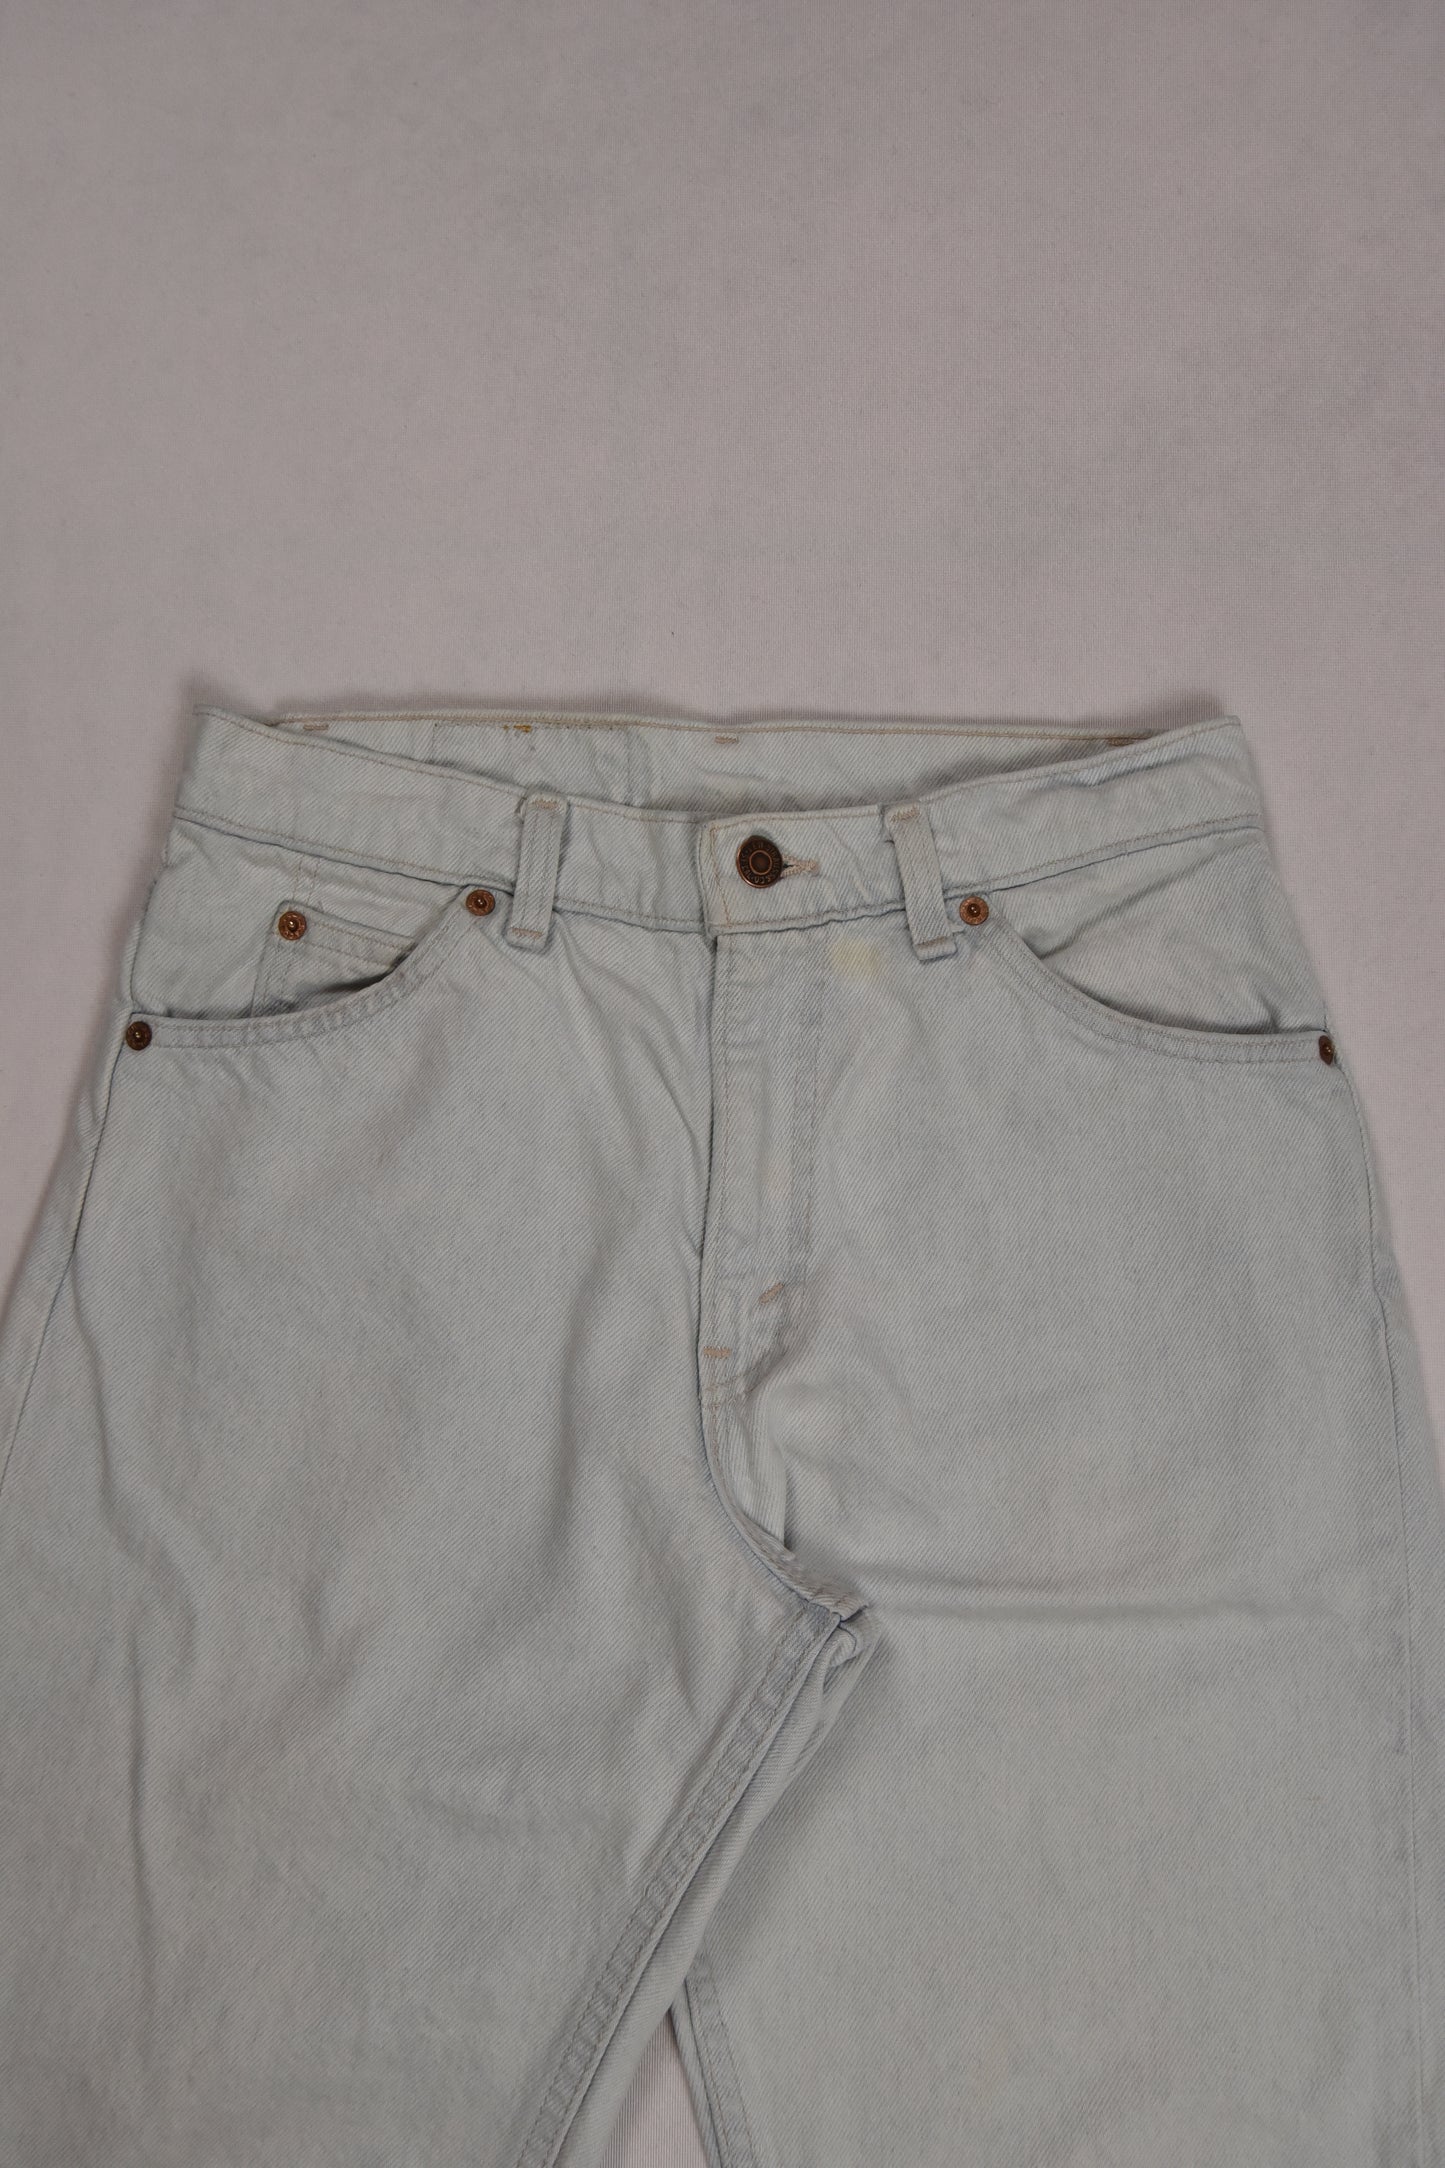 Levi's 550 Orange Tab Cropped Jeans Made in USA Vintage / 29